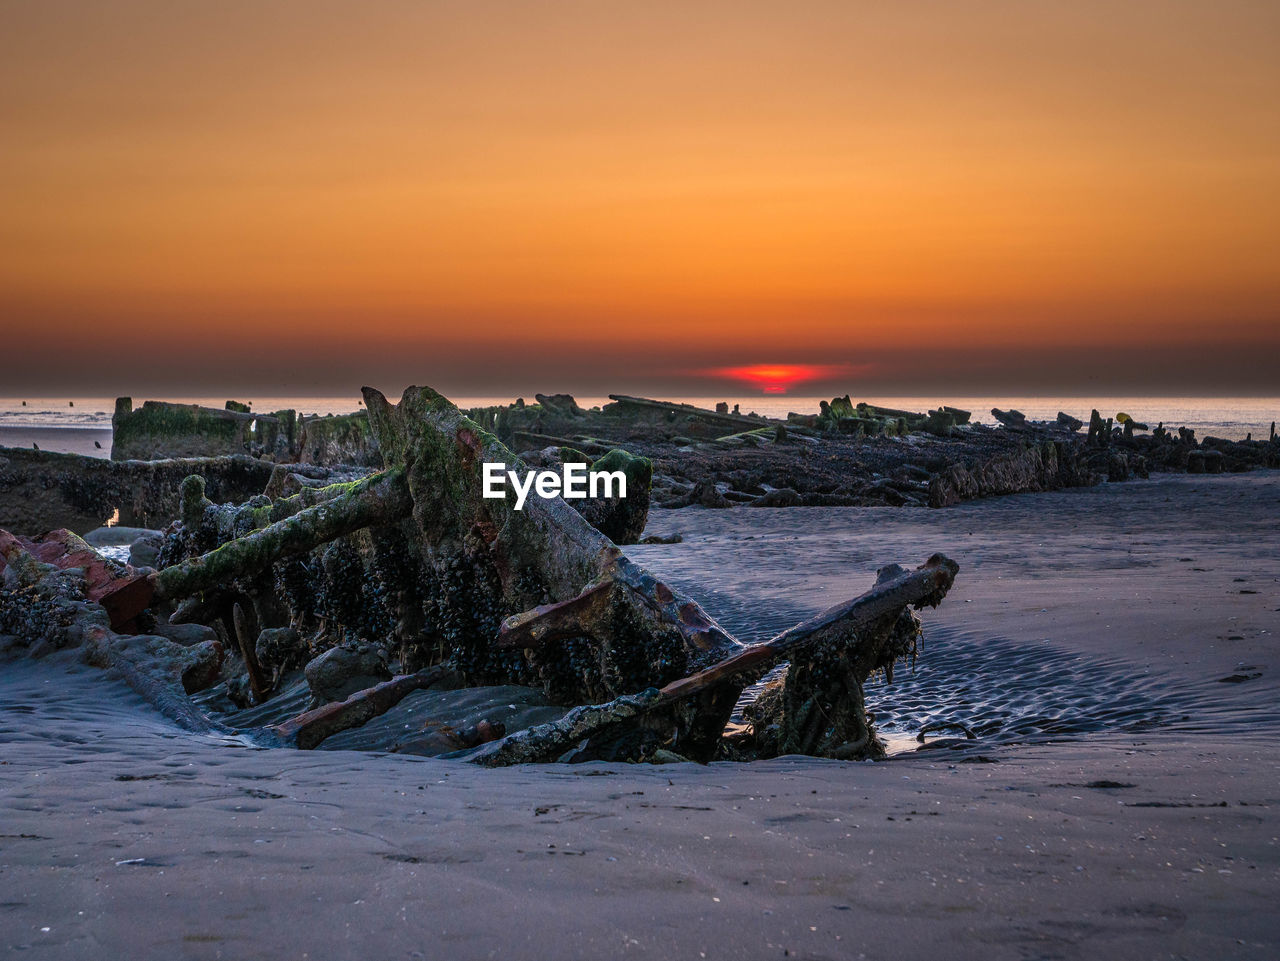 Setting sun behind an exposed shipwreck at low tide from world war ii at the beach